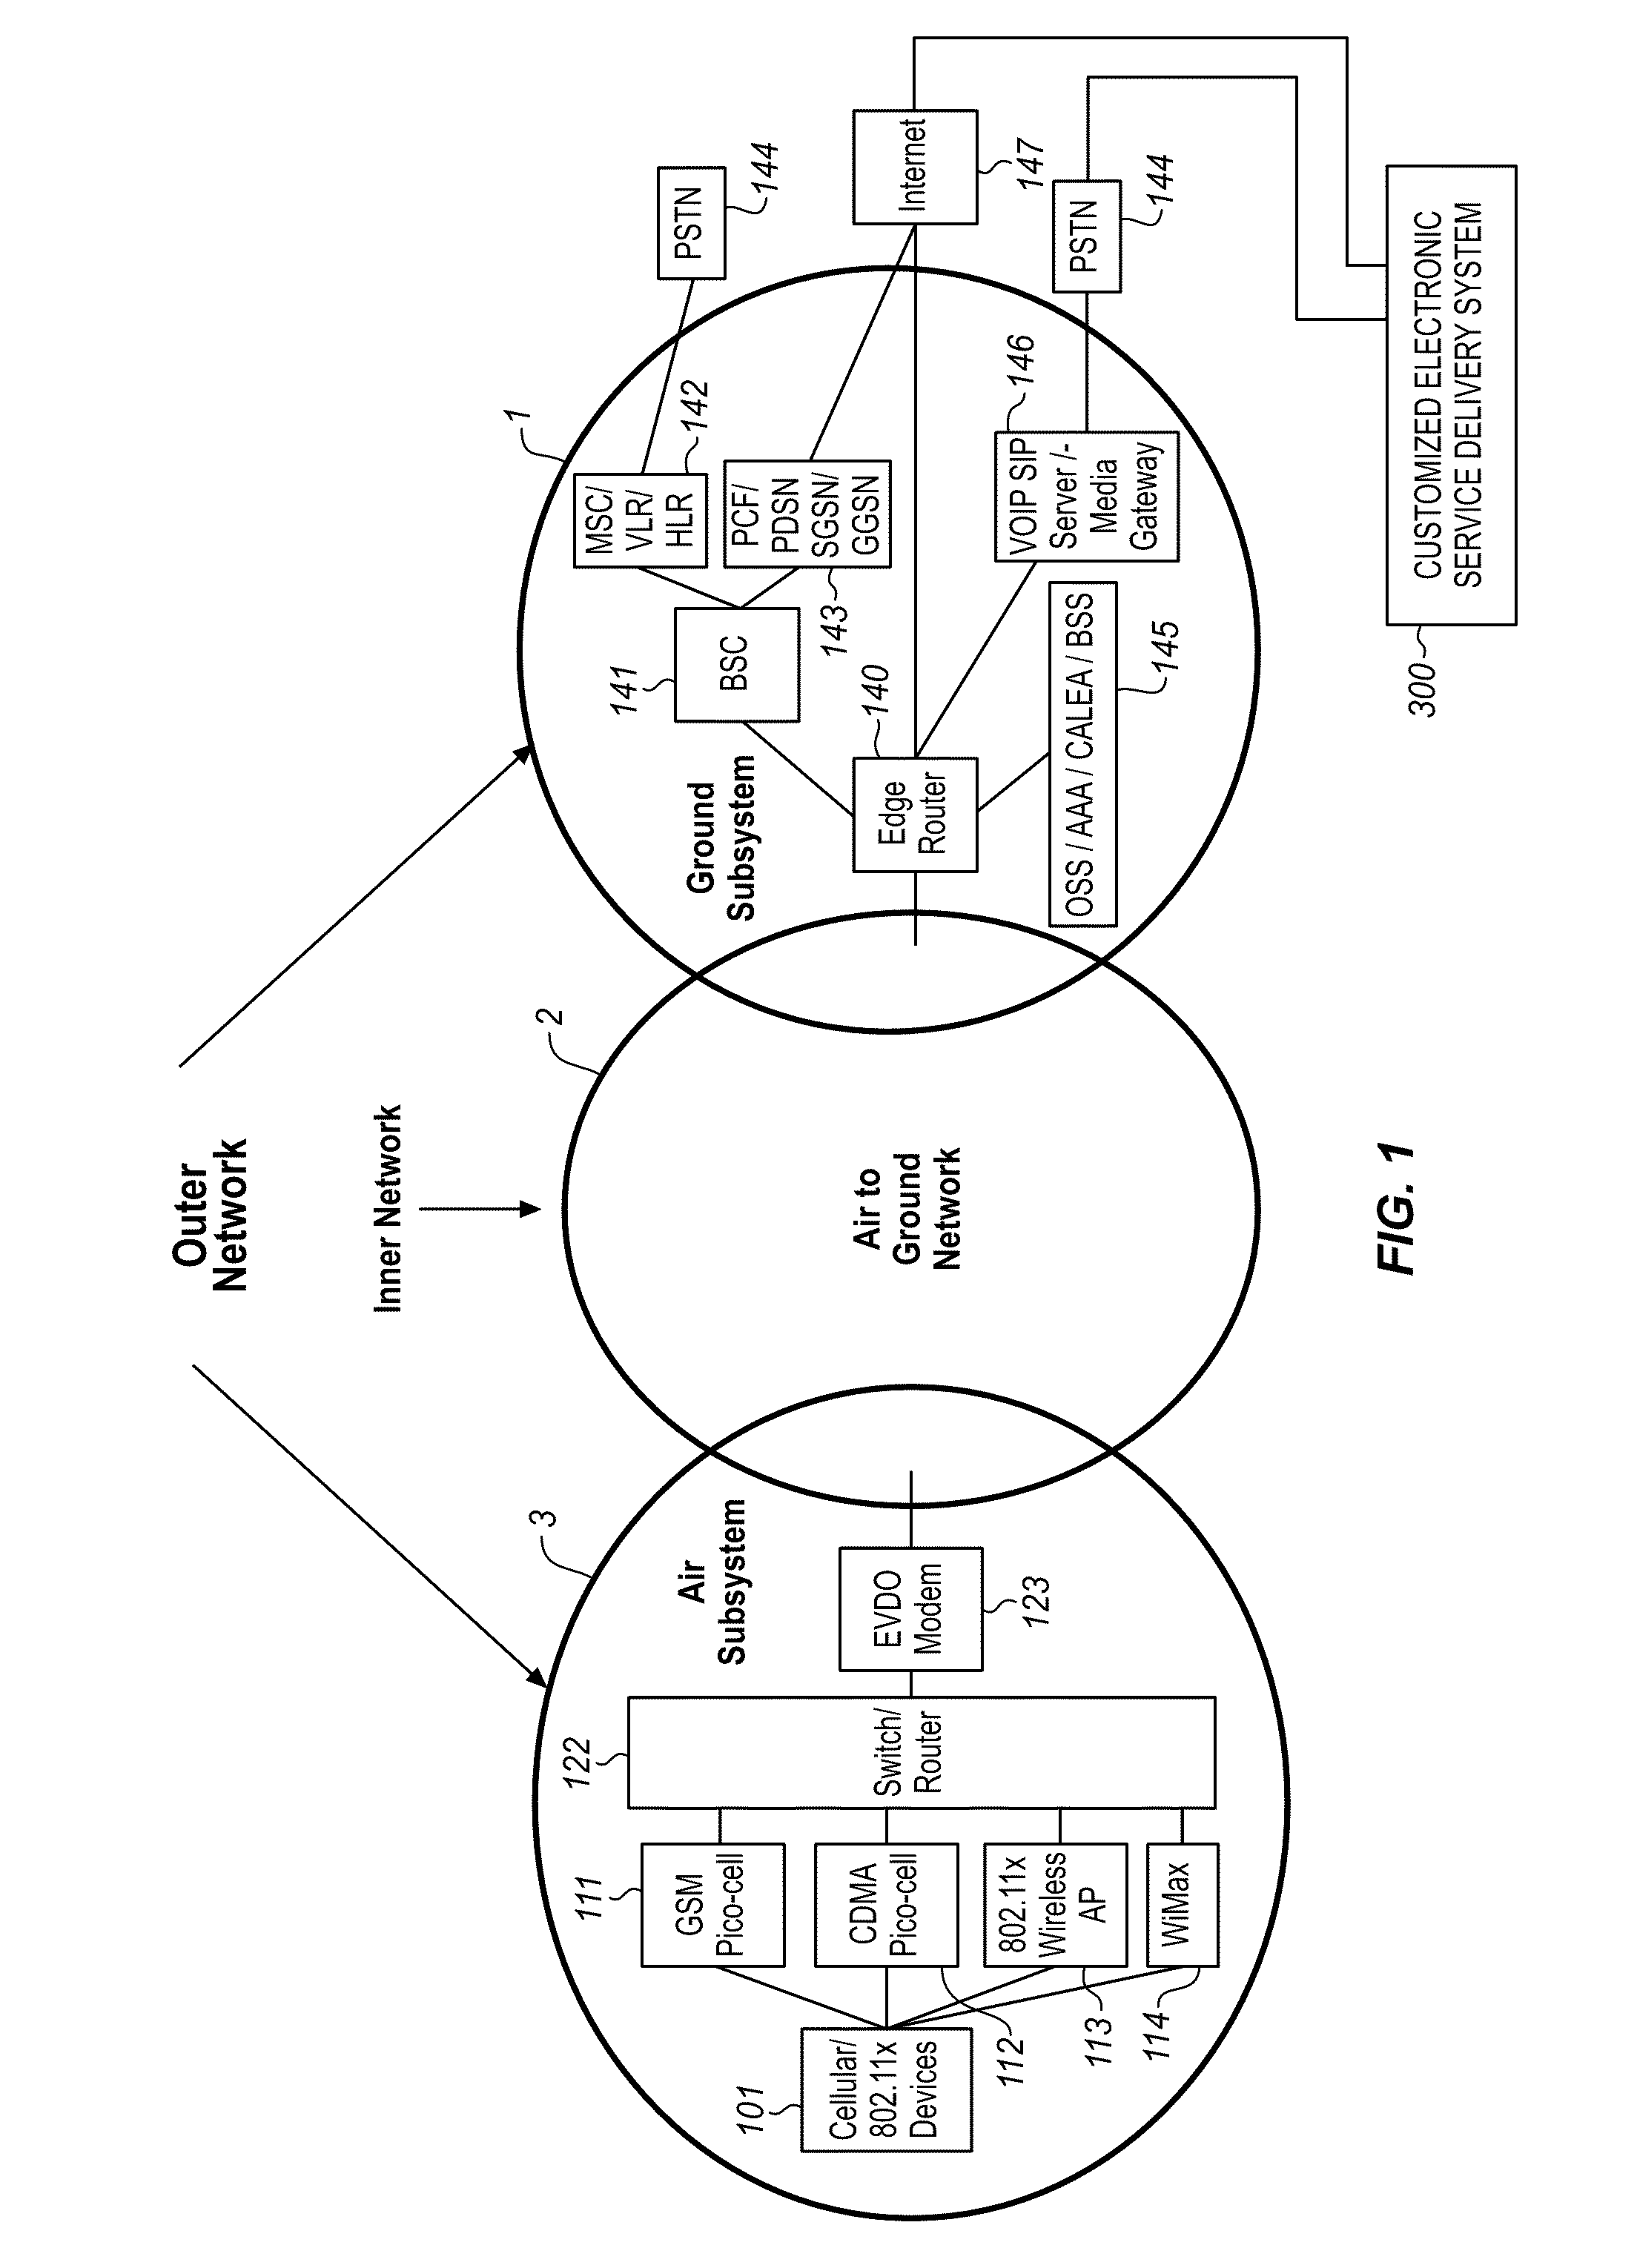 System for customizing electronic content for delivery to a passenger in an airborne wireless cellular network